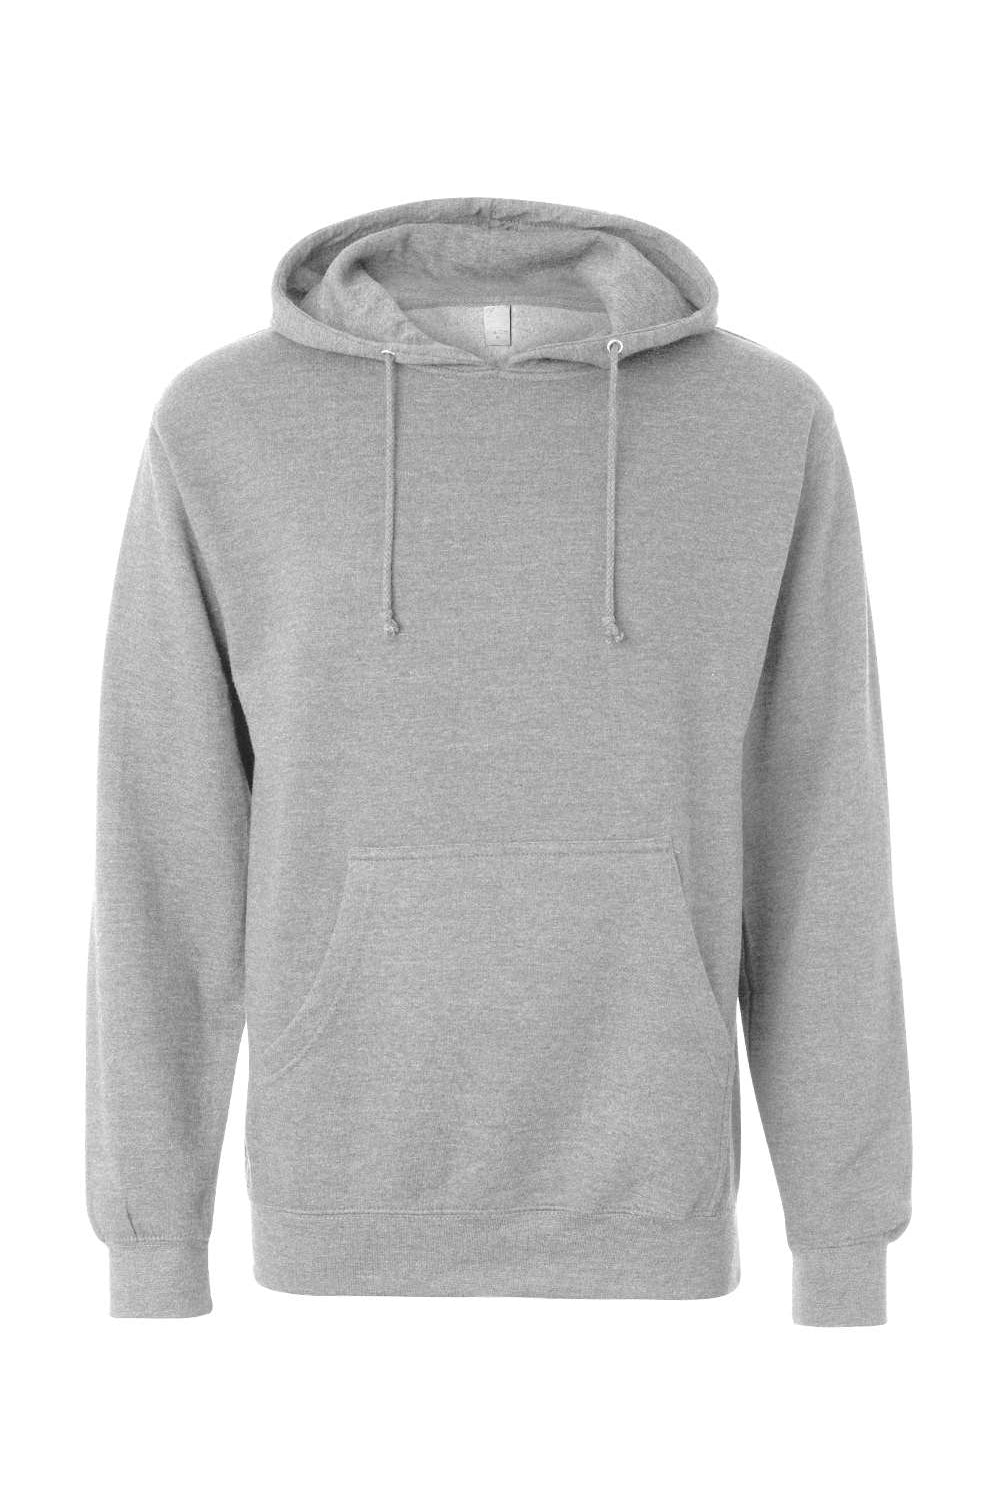 Independent Trading Co. SS4500 Mens Hooded Sweatshirt Hoodie Heather Grey Flat Front